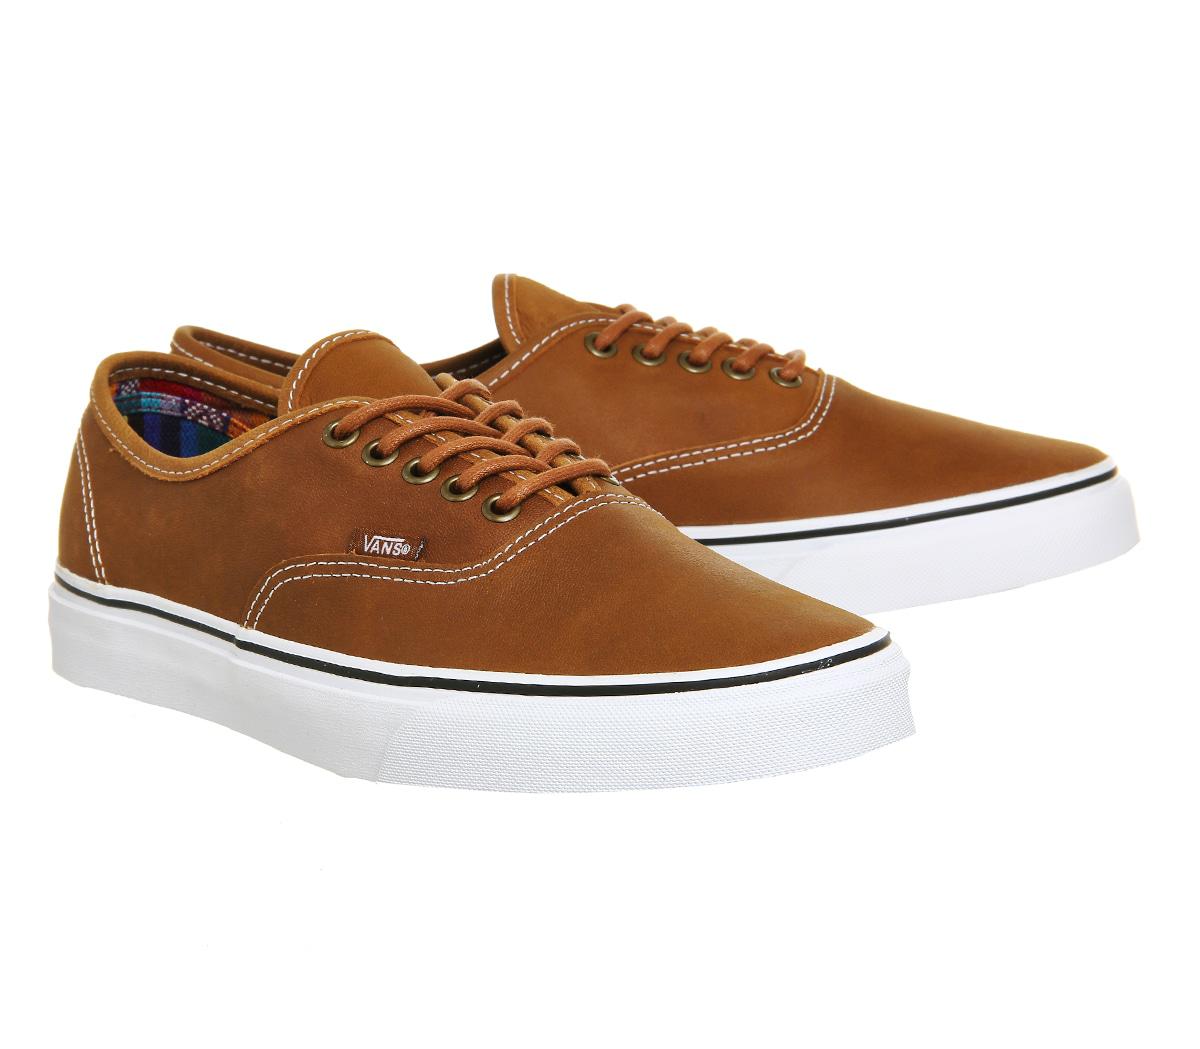 Vans Authentic Leather in Brown for Men - Lyst